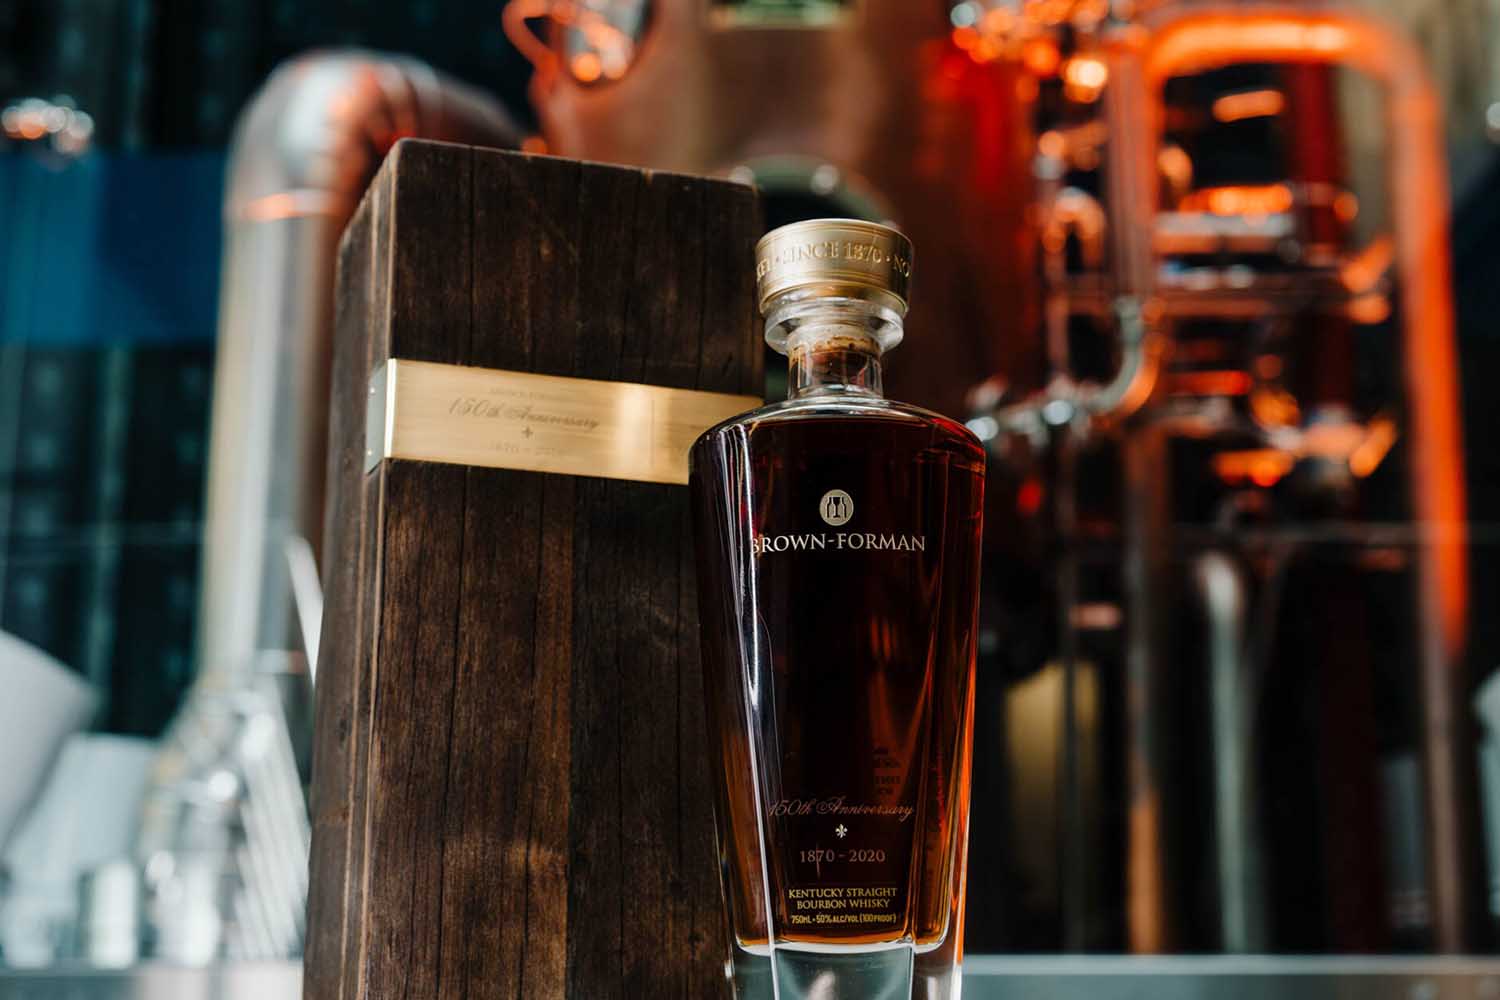 The 150th Anniversary bottle from Old Forester